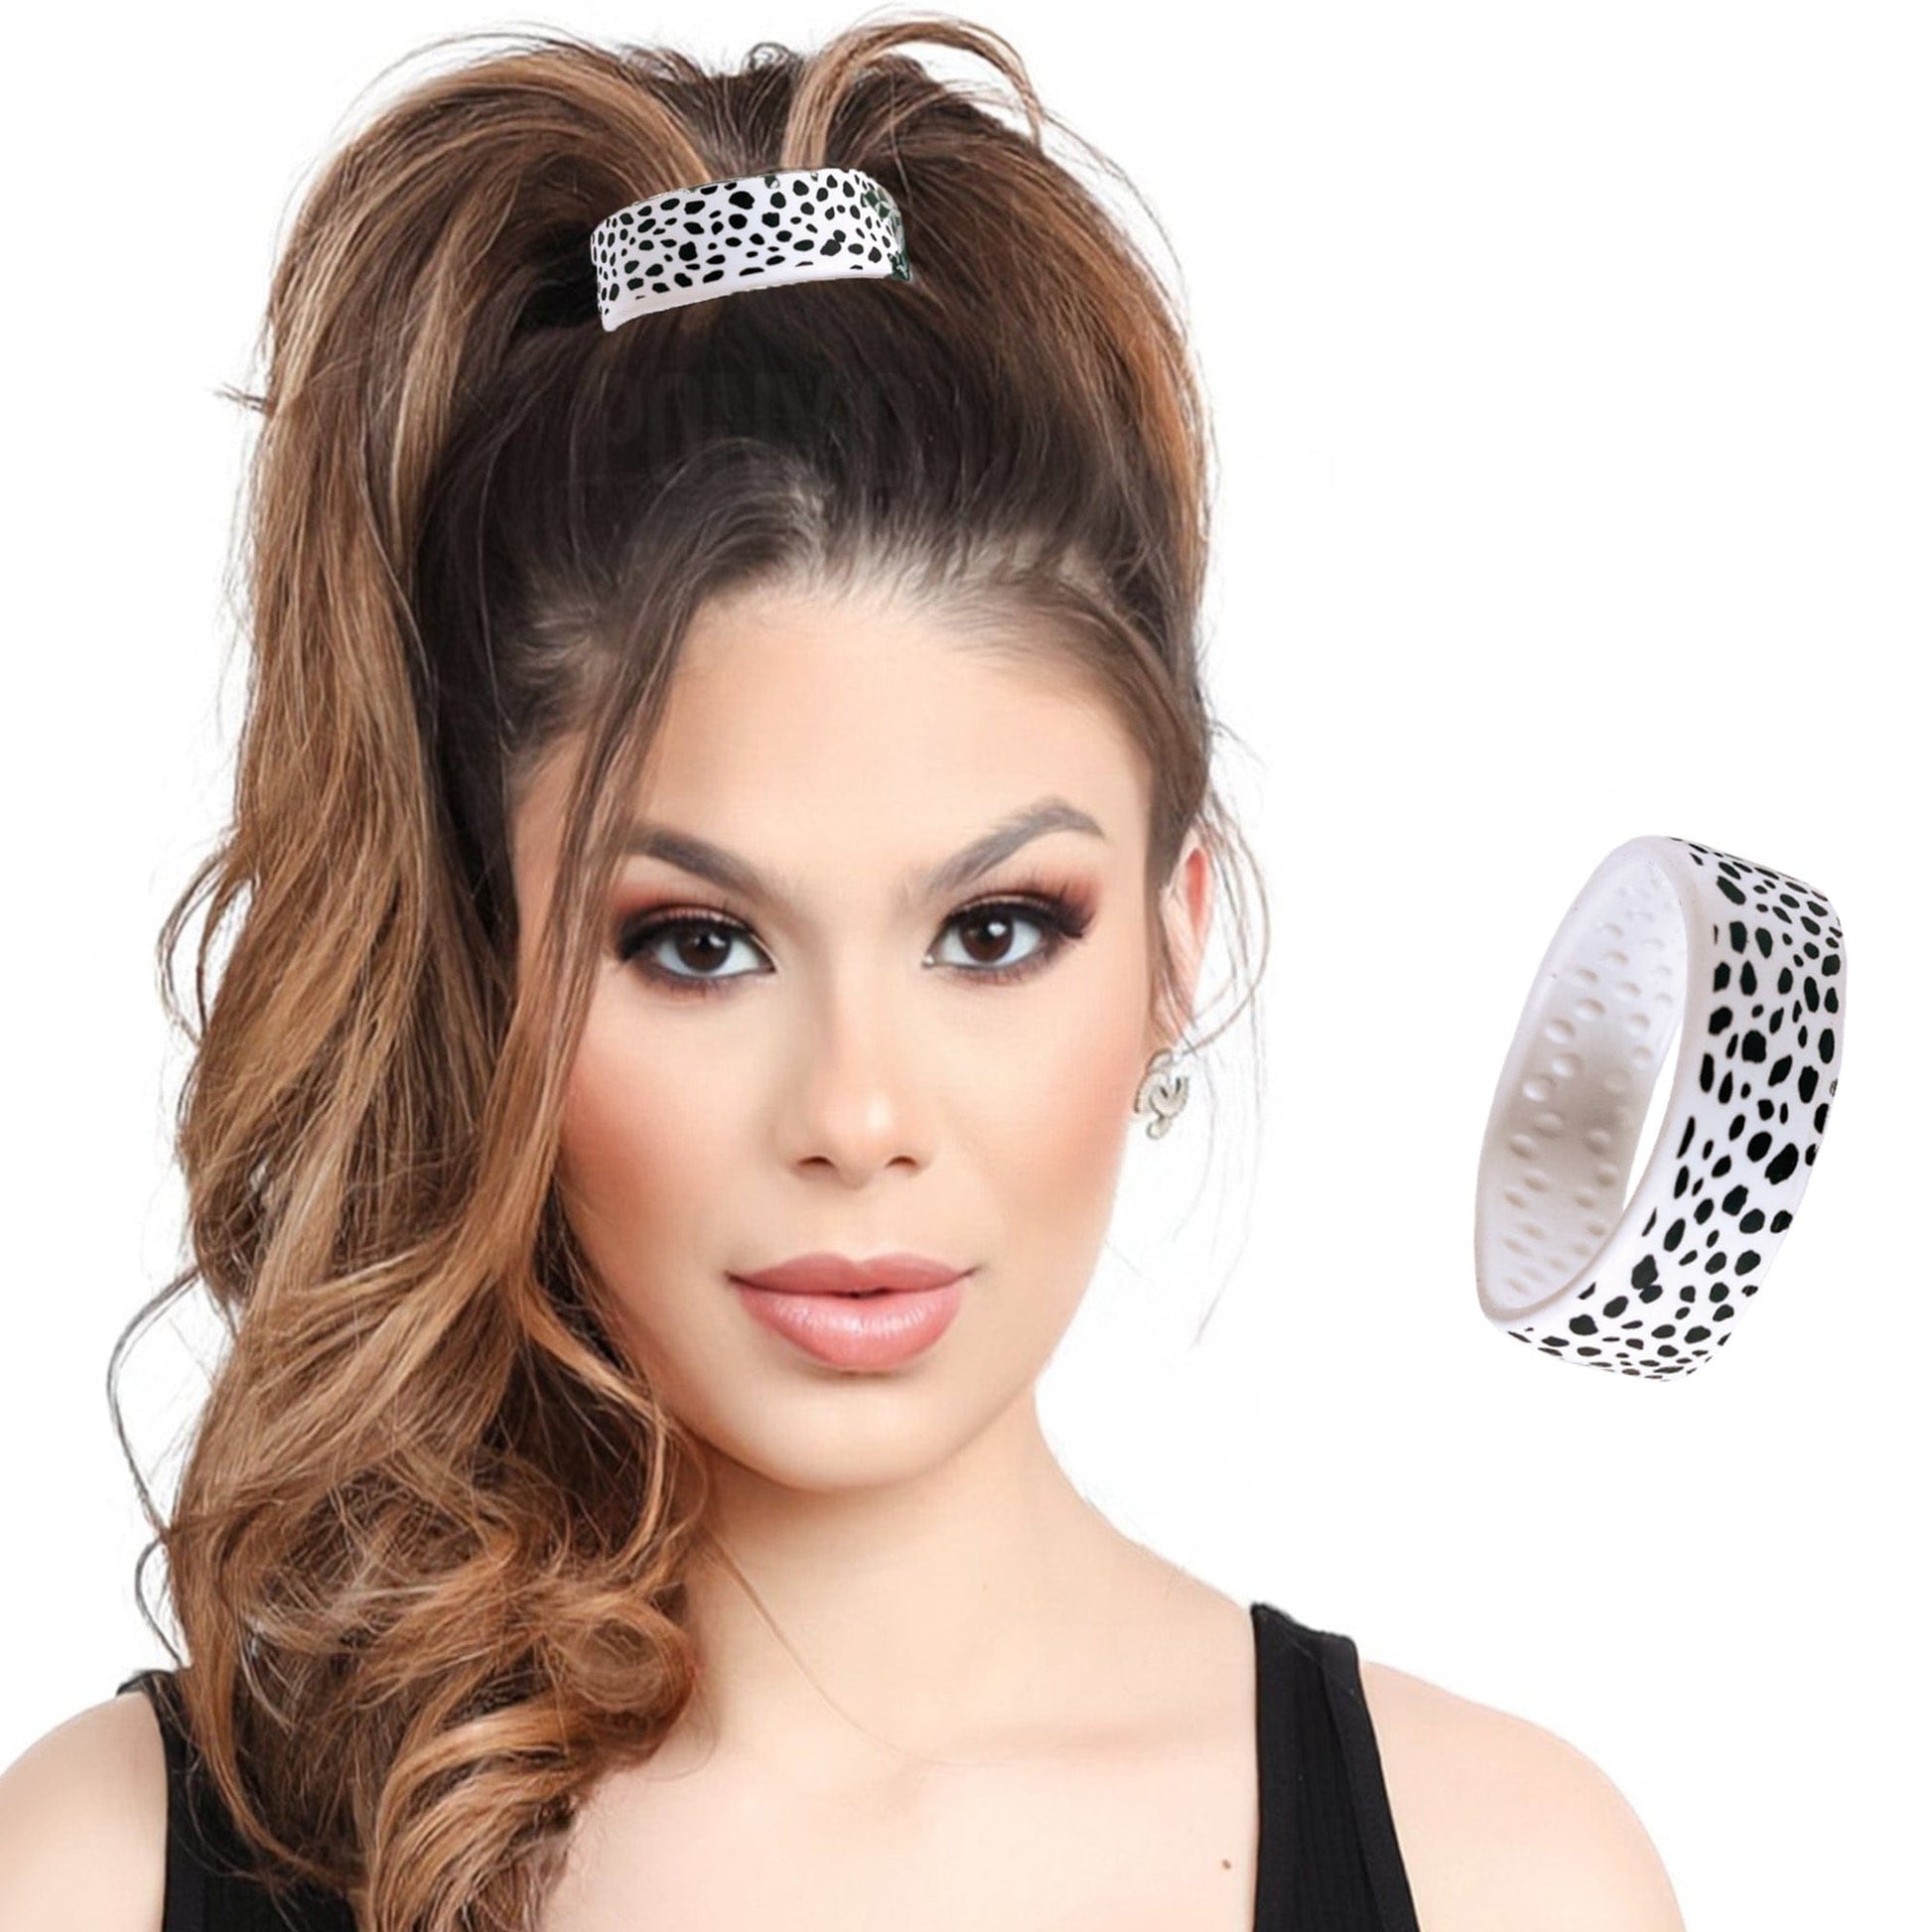 Dalmatian Limited Edition Designer PONY-O. This larger size is perfect for ponytails and all-up styles.